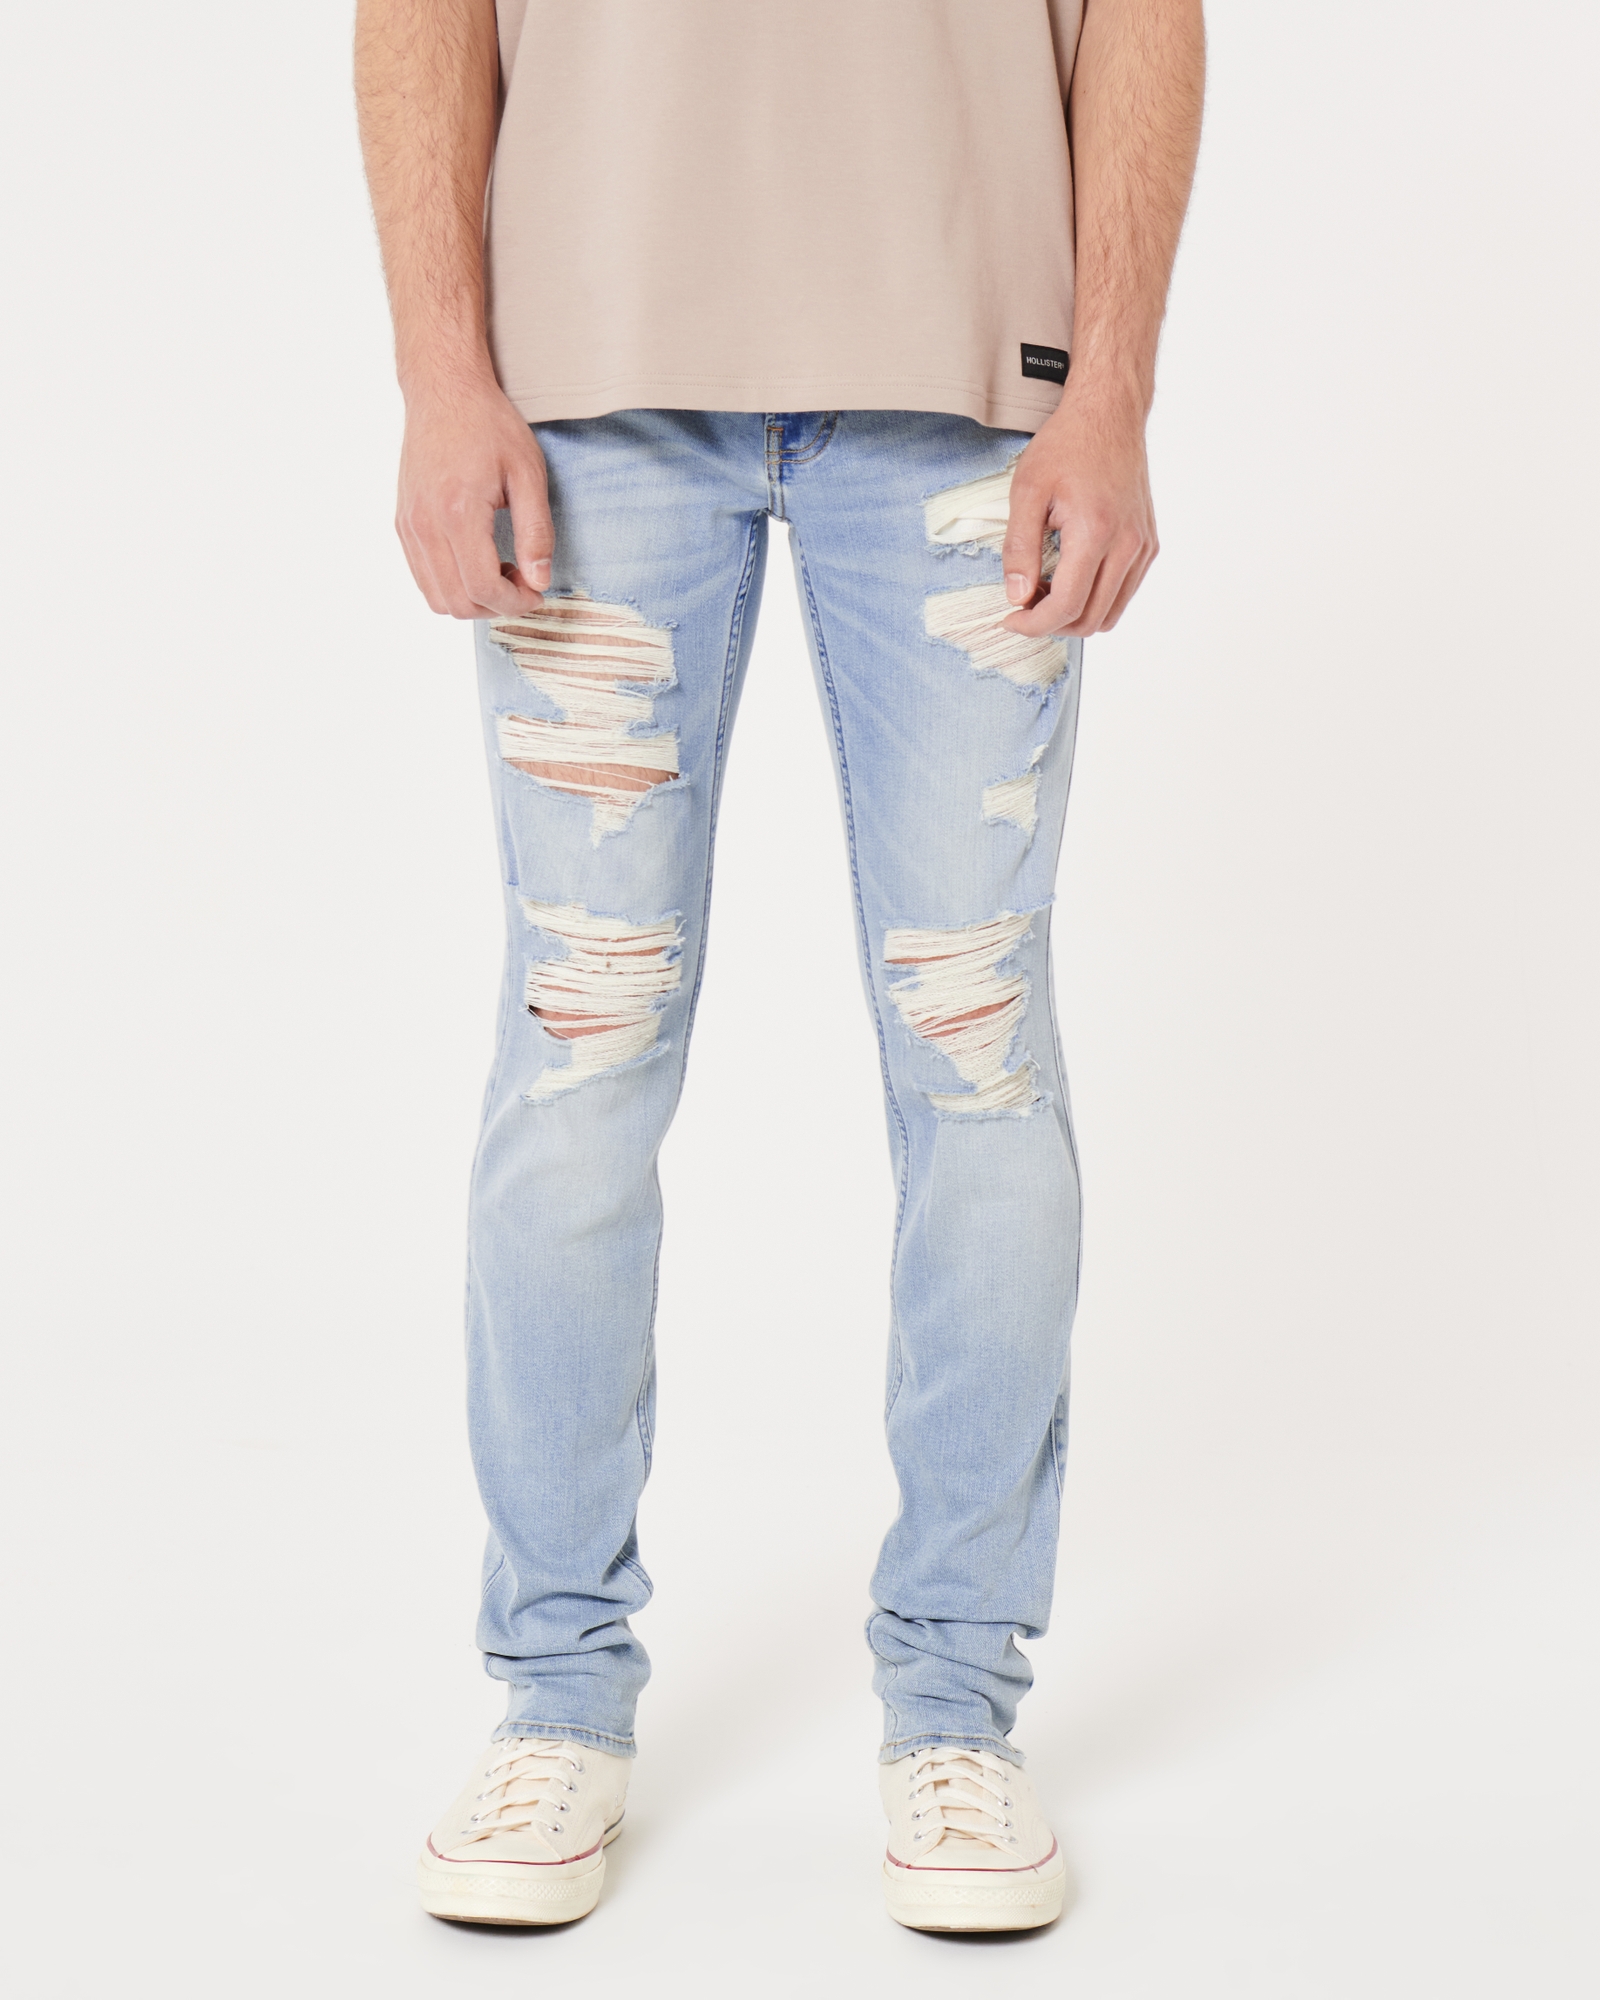 Hollister Men's Slim Straight Advanced Stretch Ripped Jeans. W32